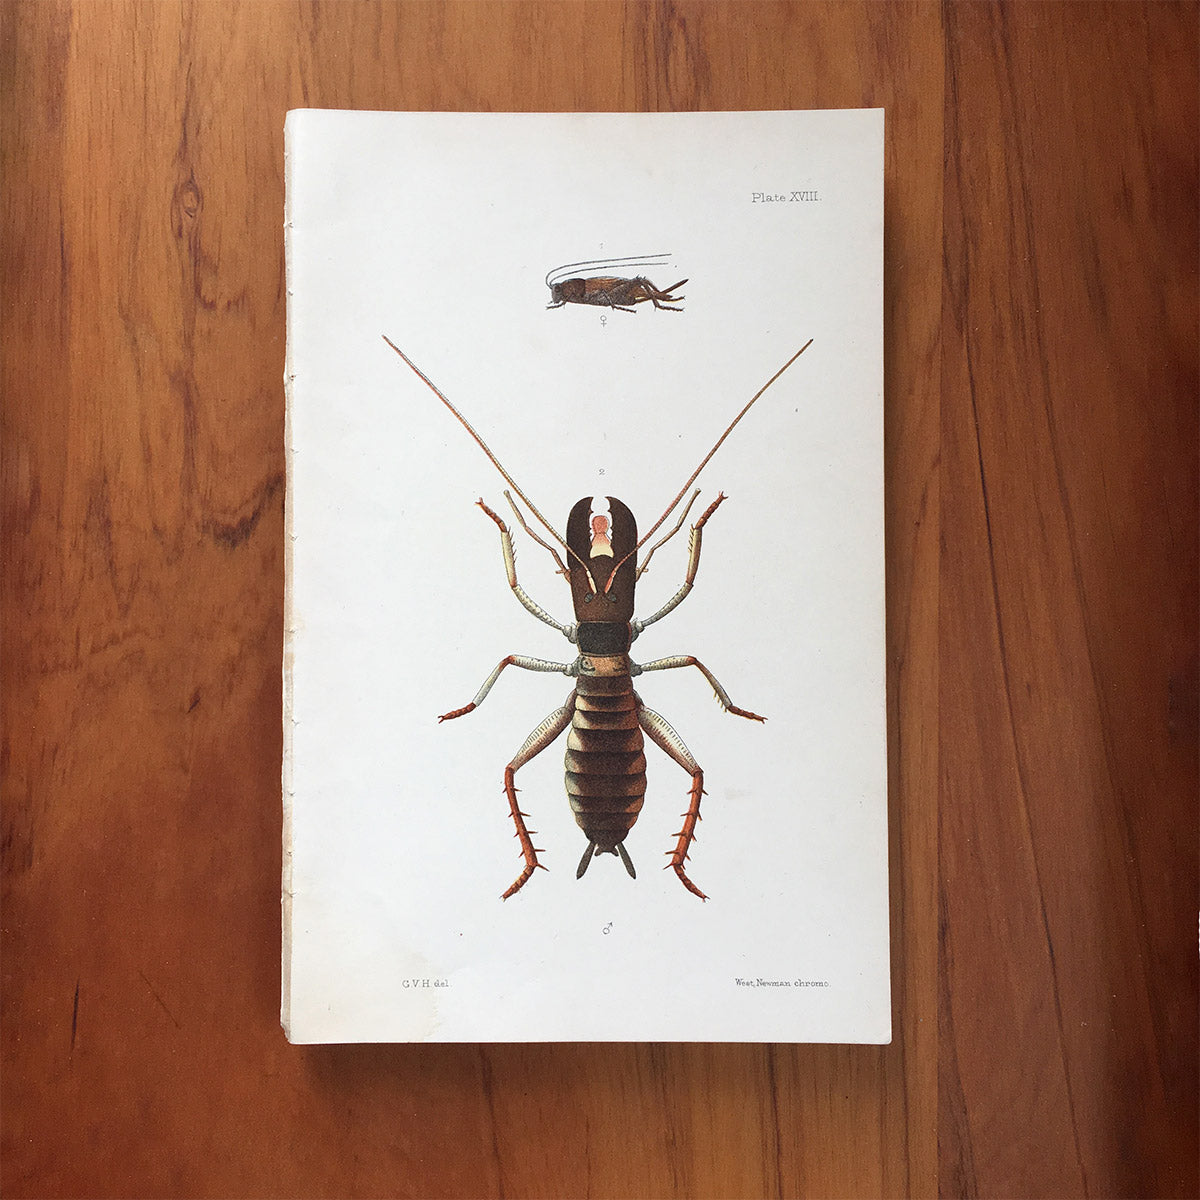 New Zealand insects. Plate XVIII. Orthoptera